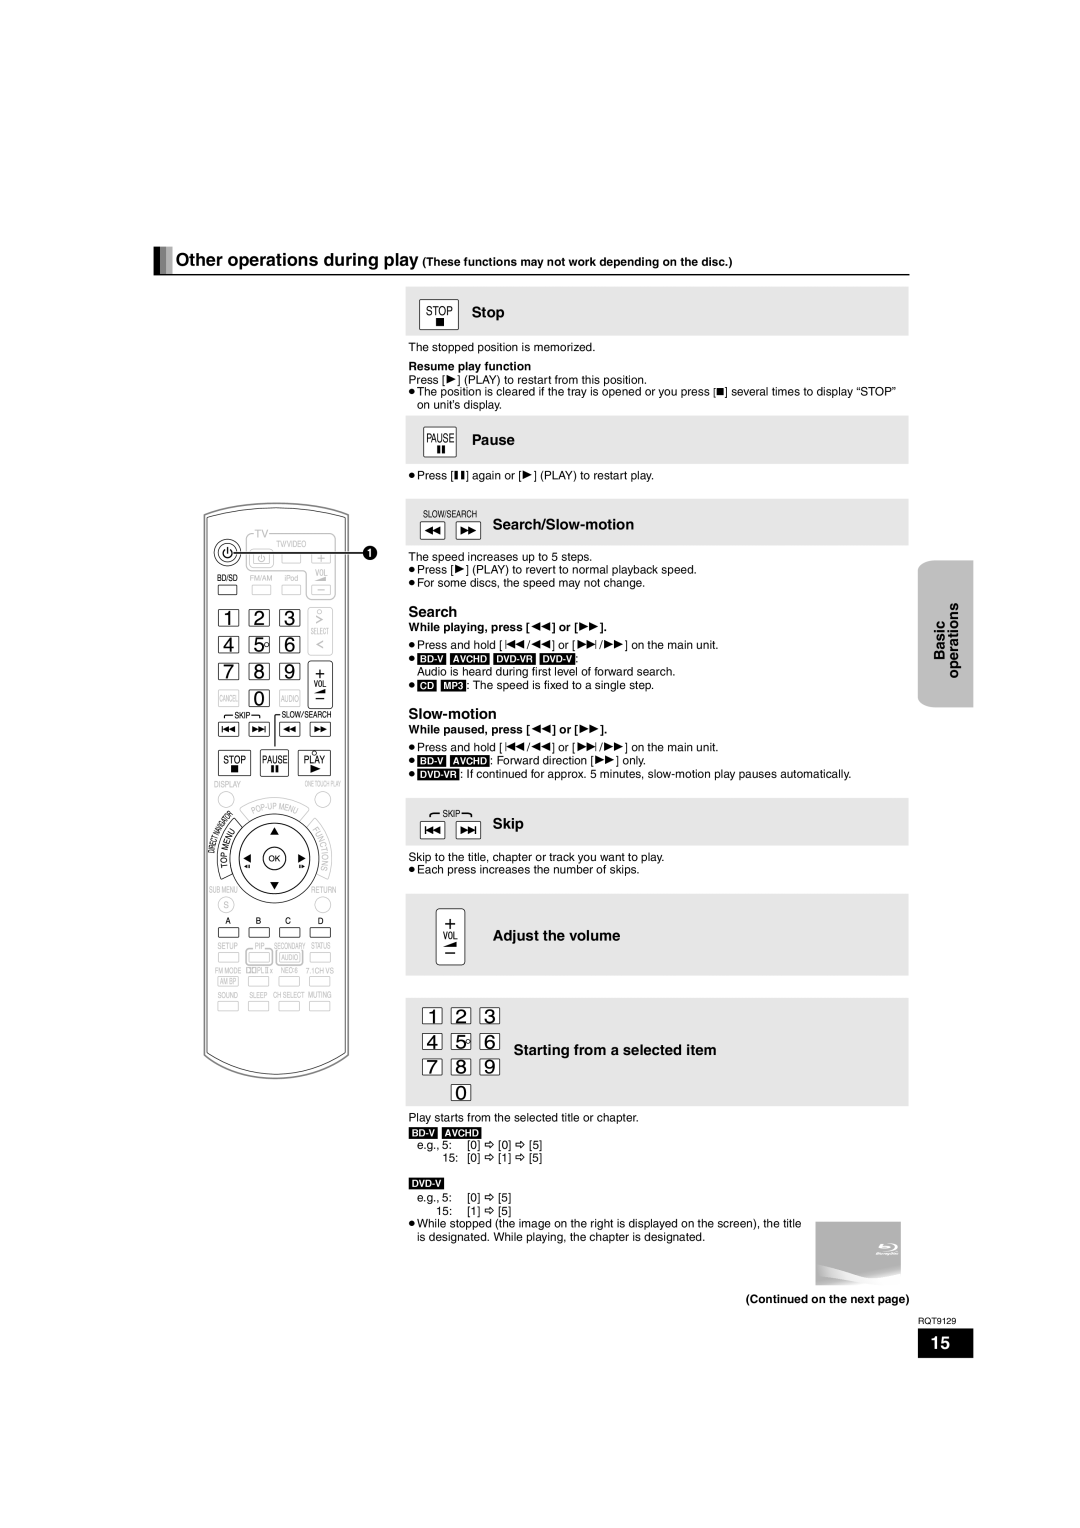 Panasonic SC-BT100 warranty Search/Slow-motion, Skip, Adjust the volume Starting from a selected item, Basic operations 